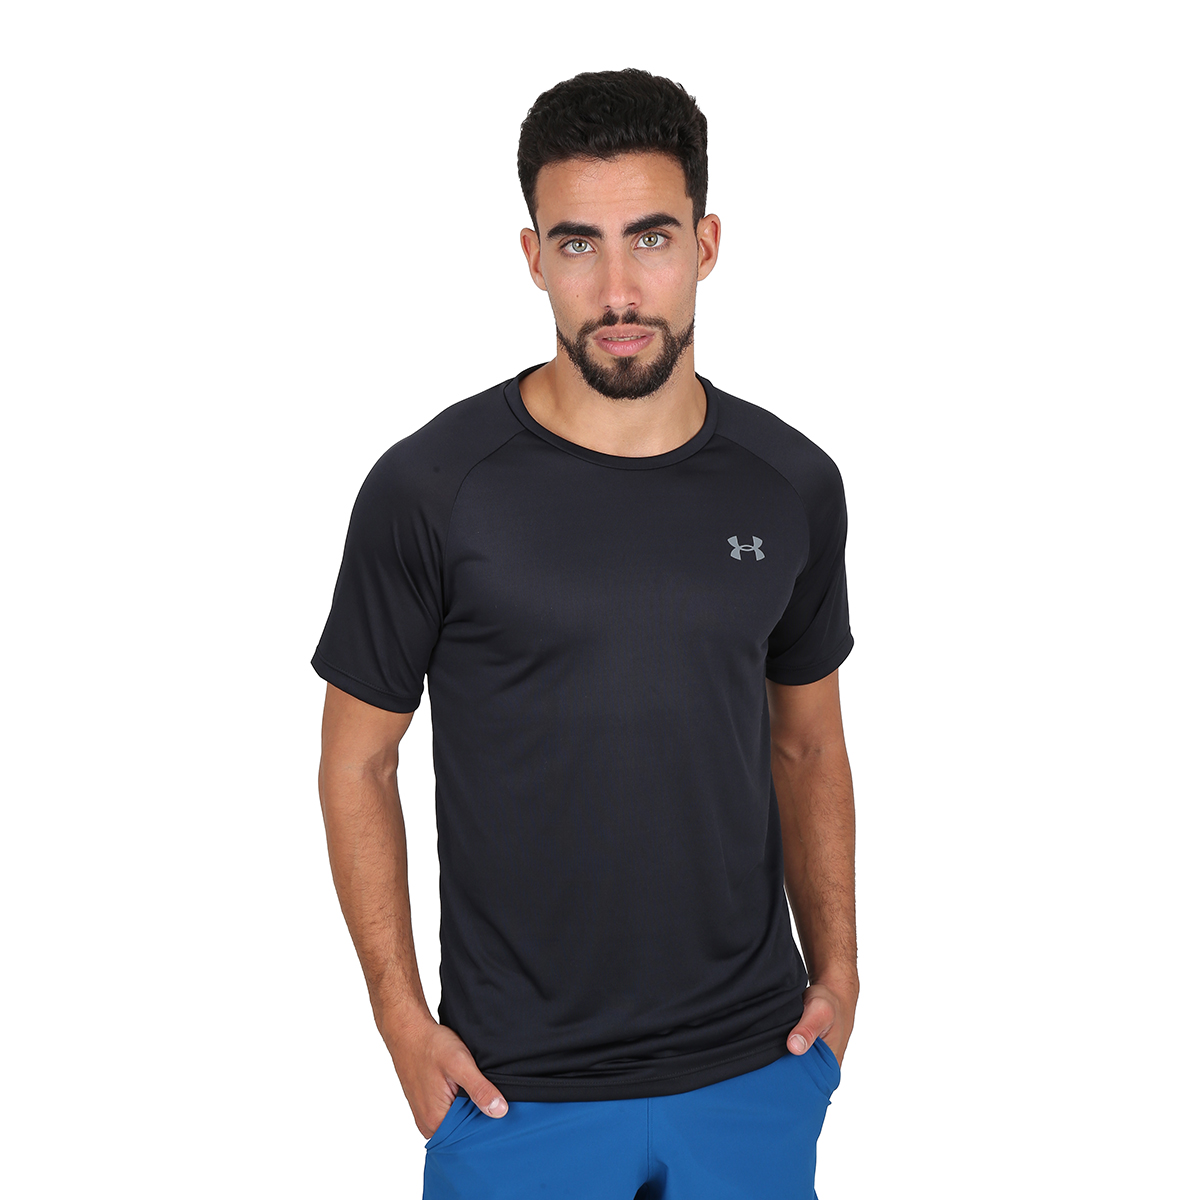 Remera Entrenamiento Under Armour Tech 2.0 Hombre,  image number null